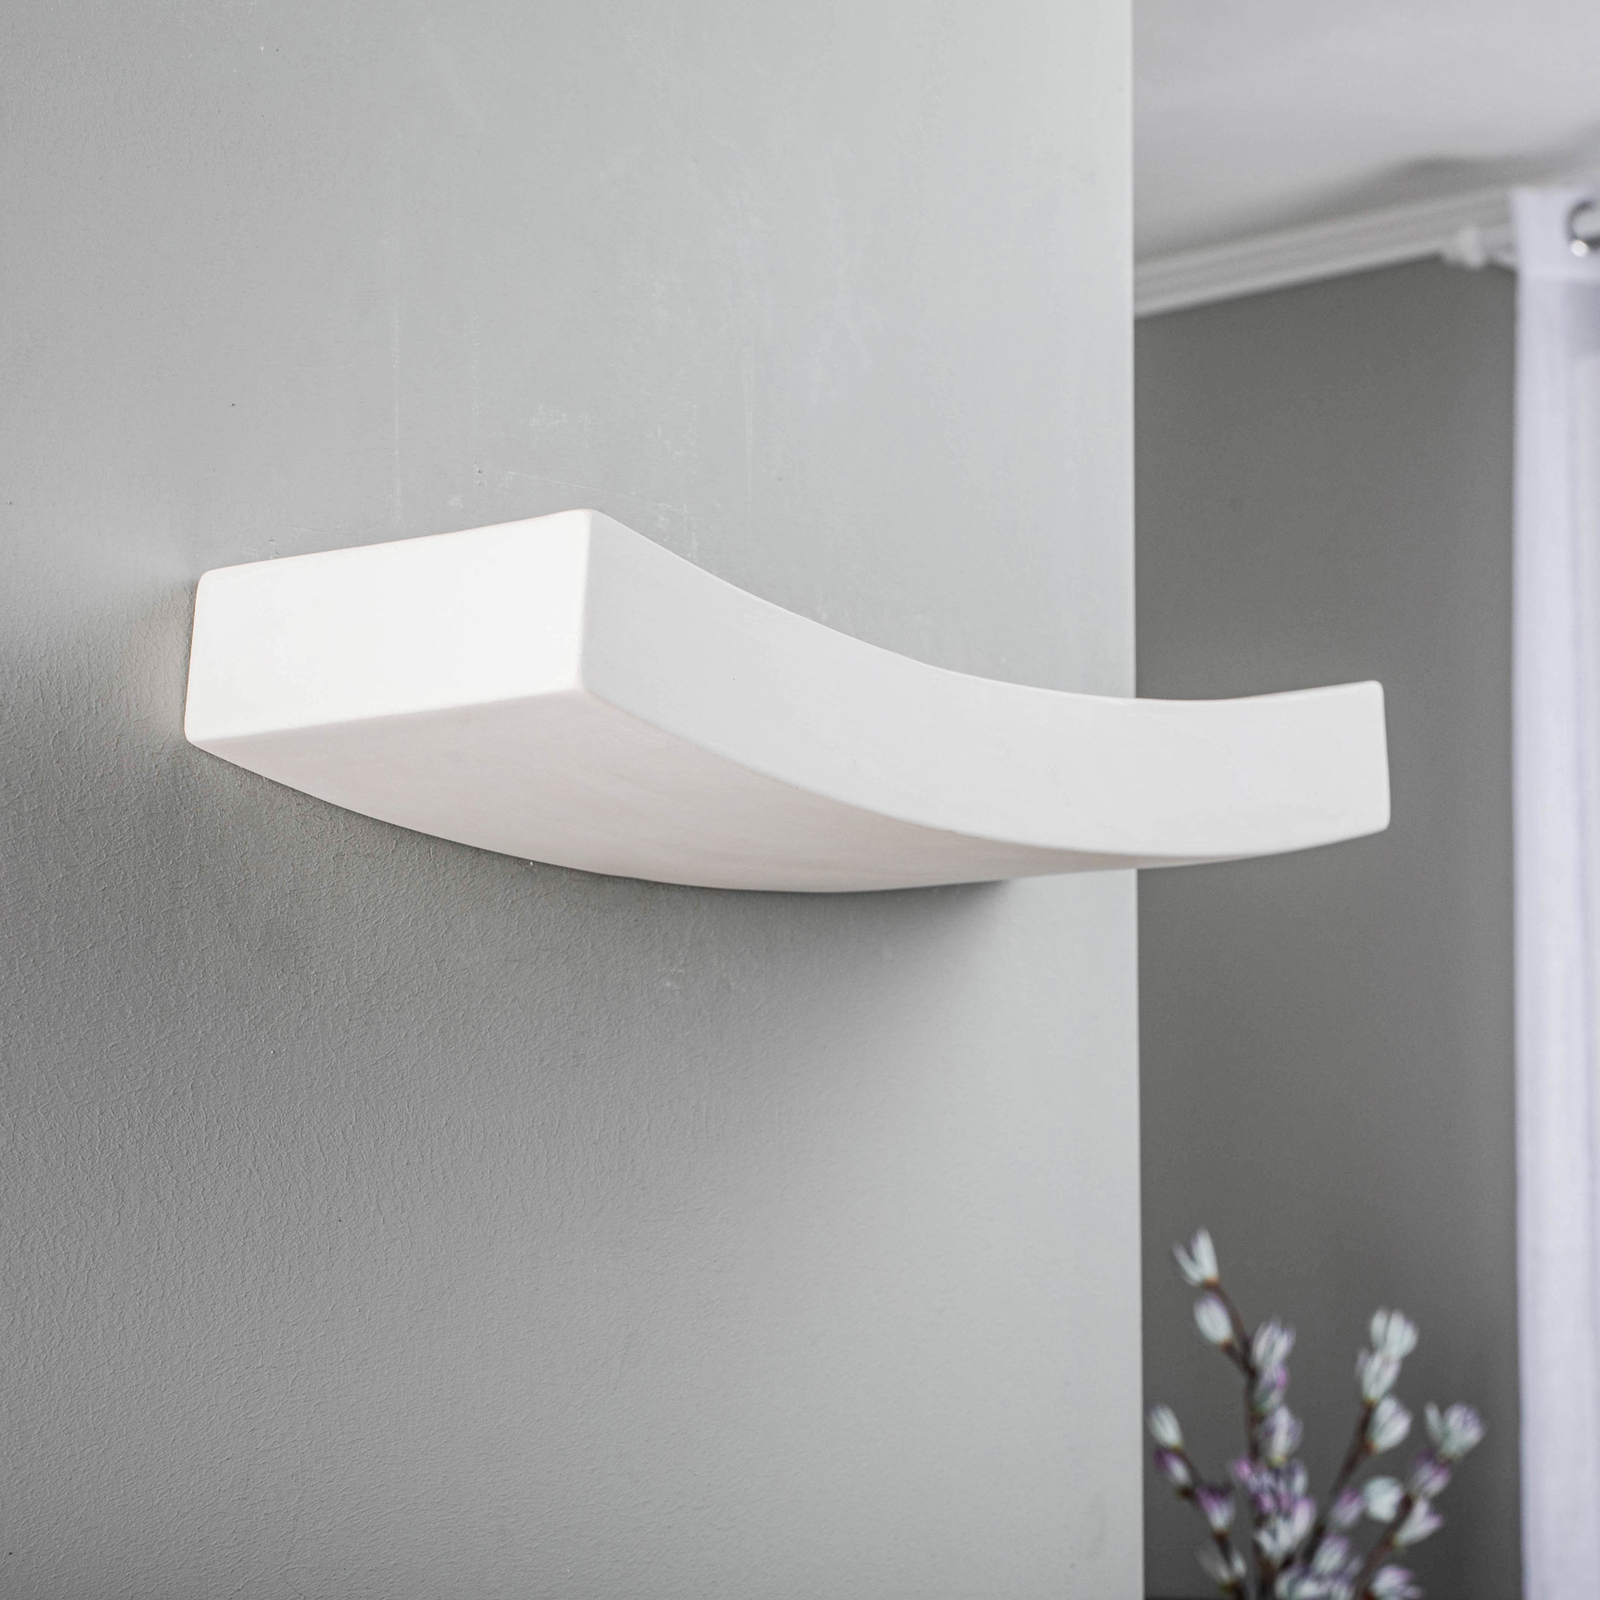 Lino wall lamp made of ceramics, curved shape